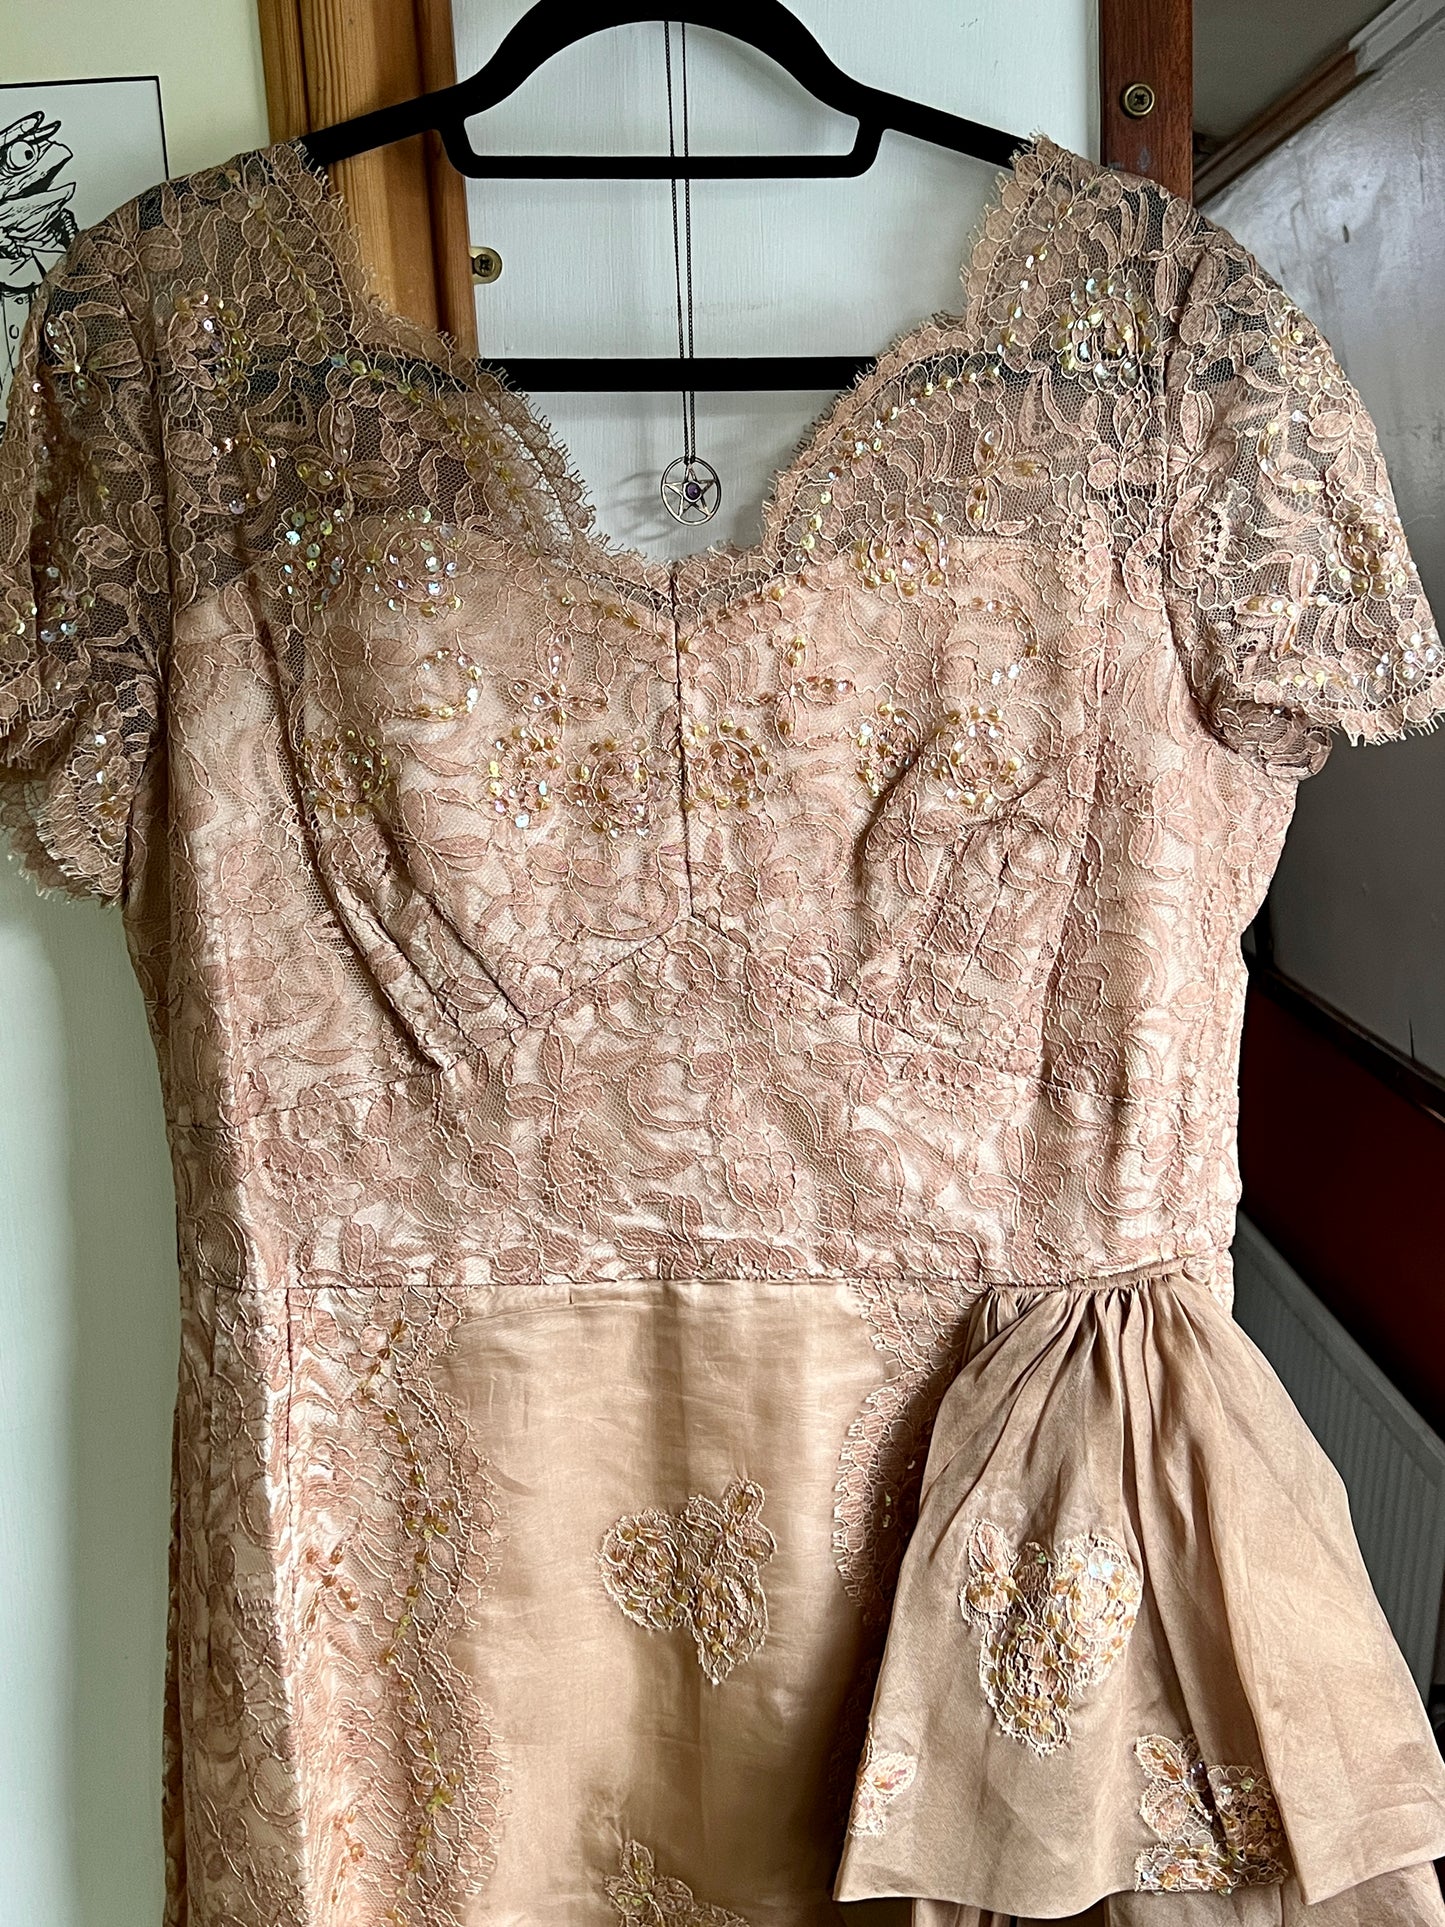 Vintage lace sequin and chiffon bombshell cocktail wiggle dress XL